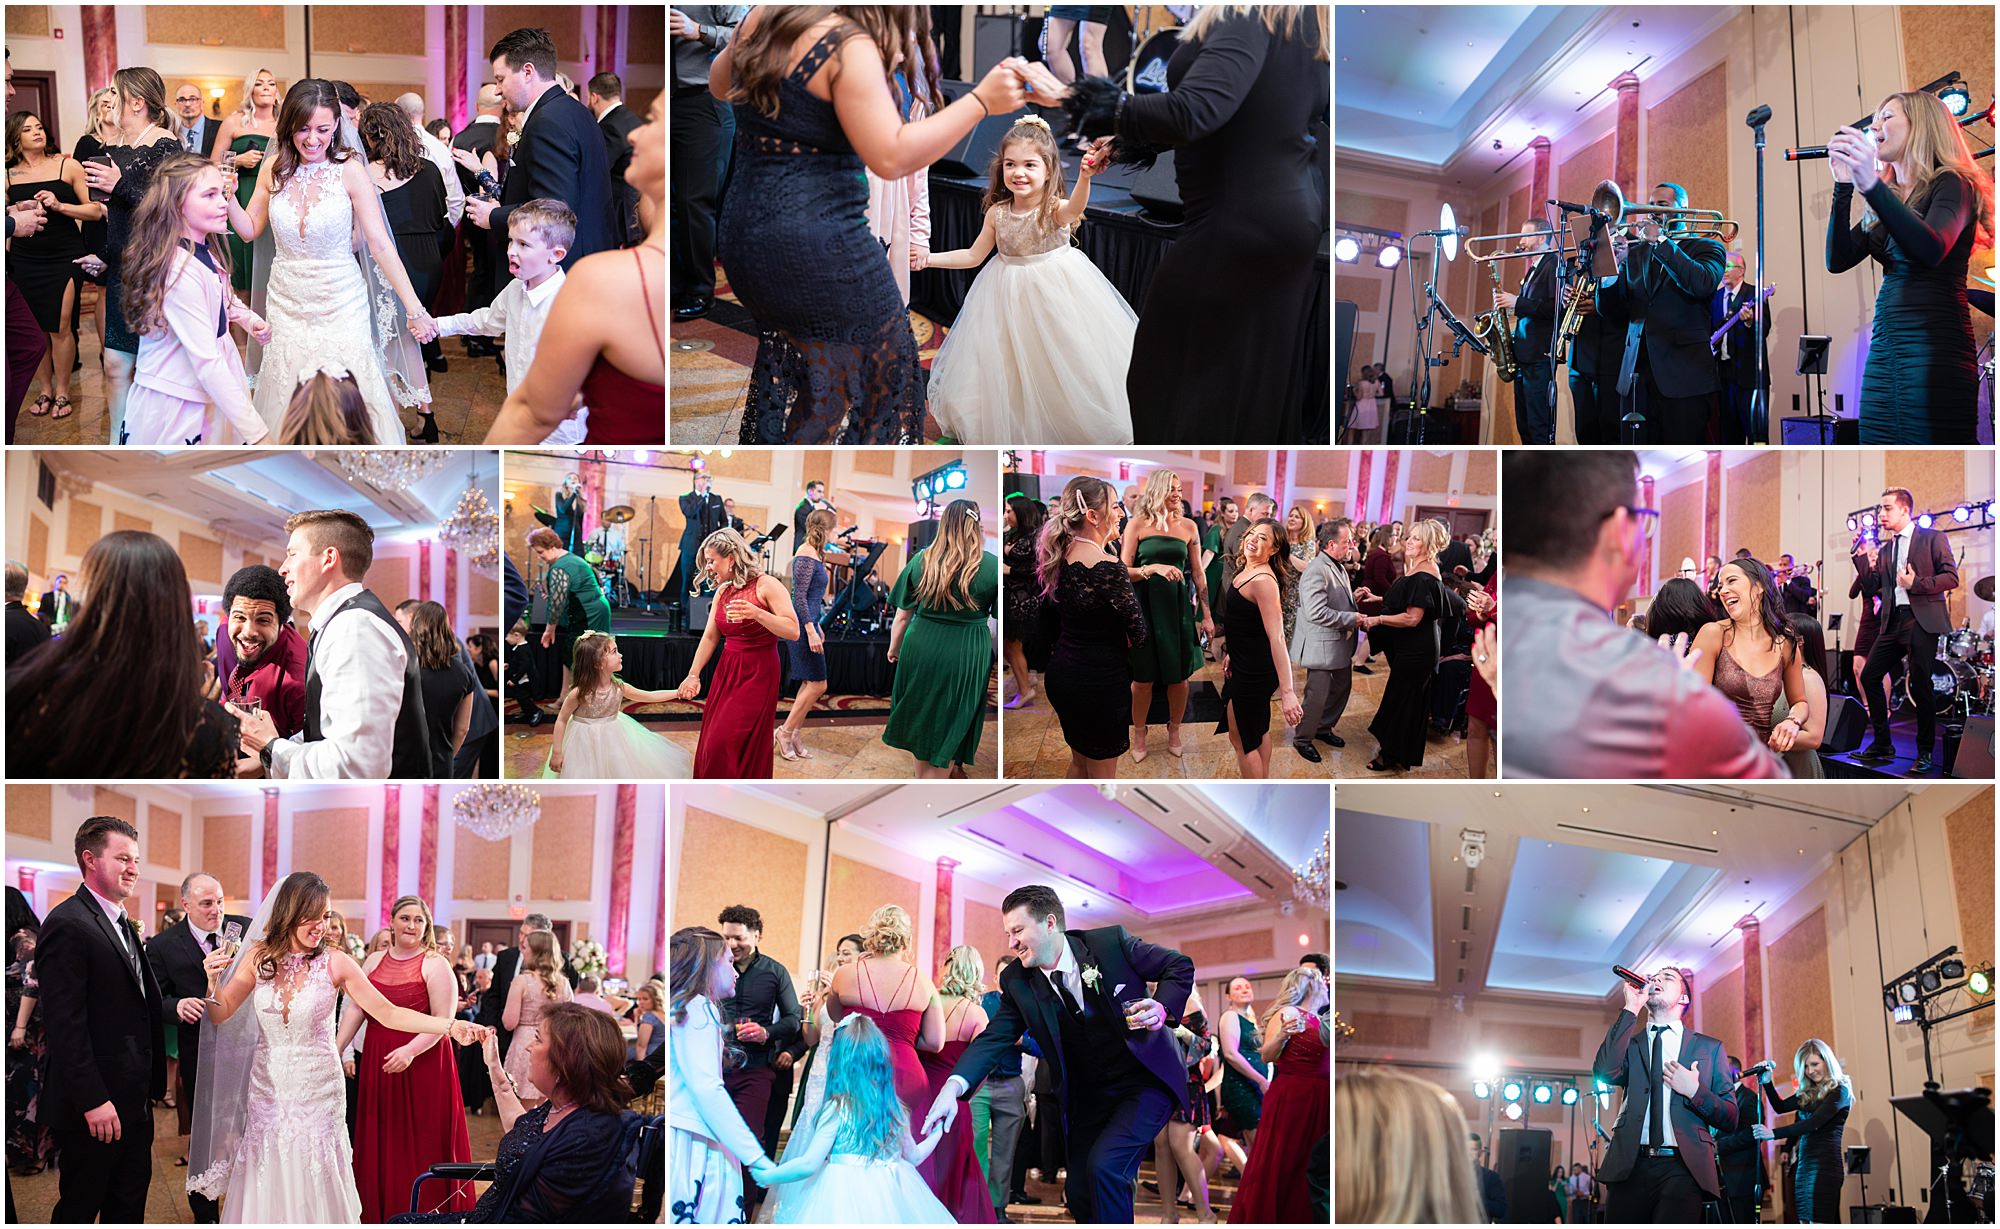 Fun dancing at the Merion wedding reception